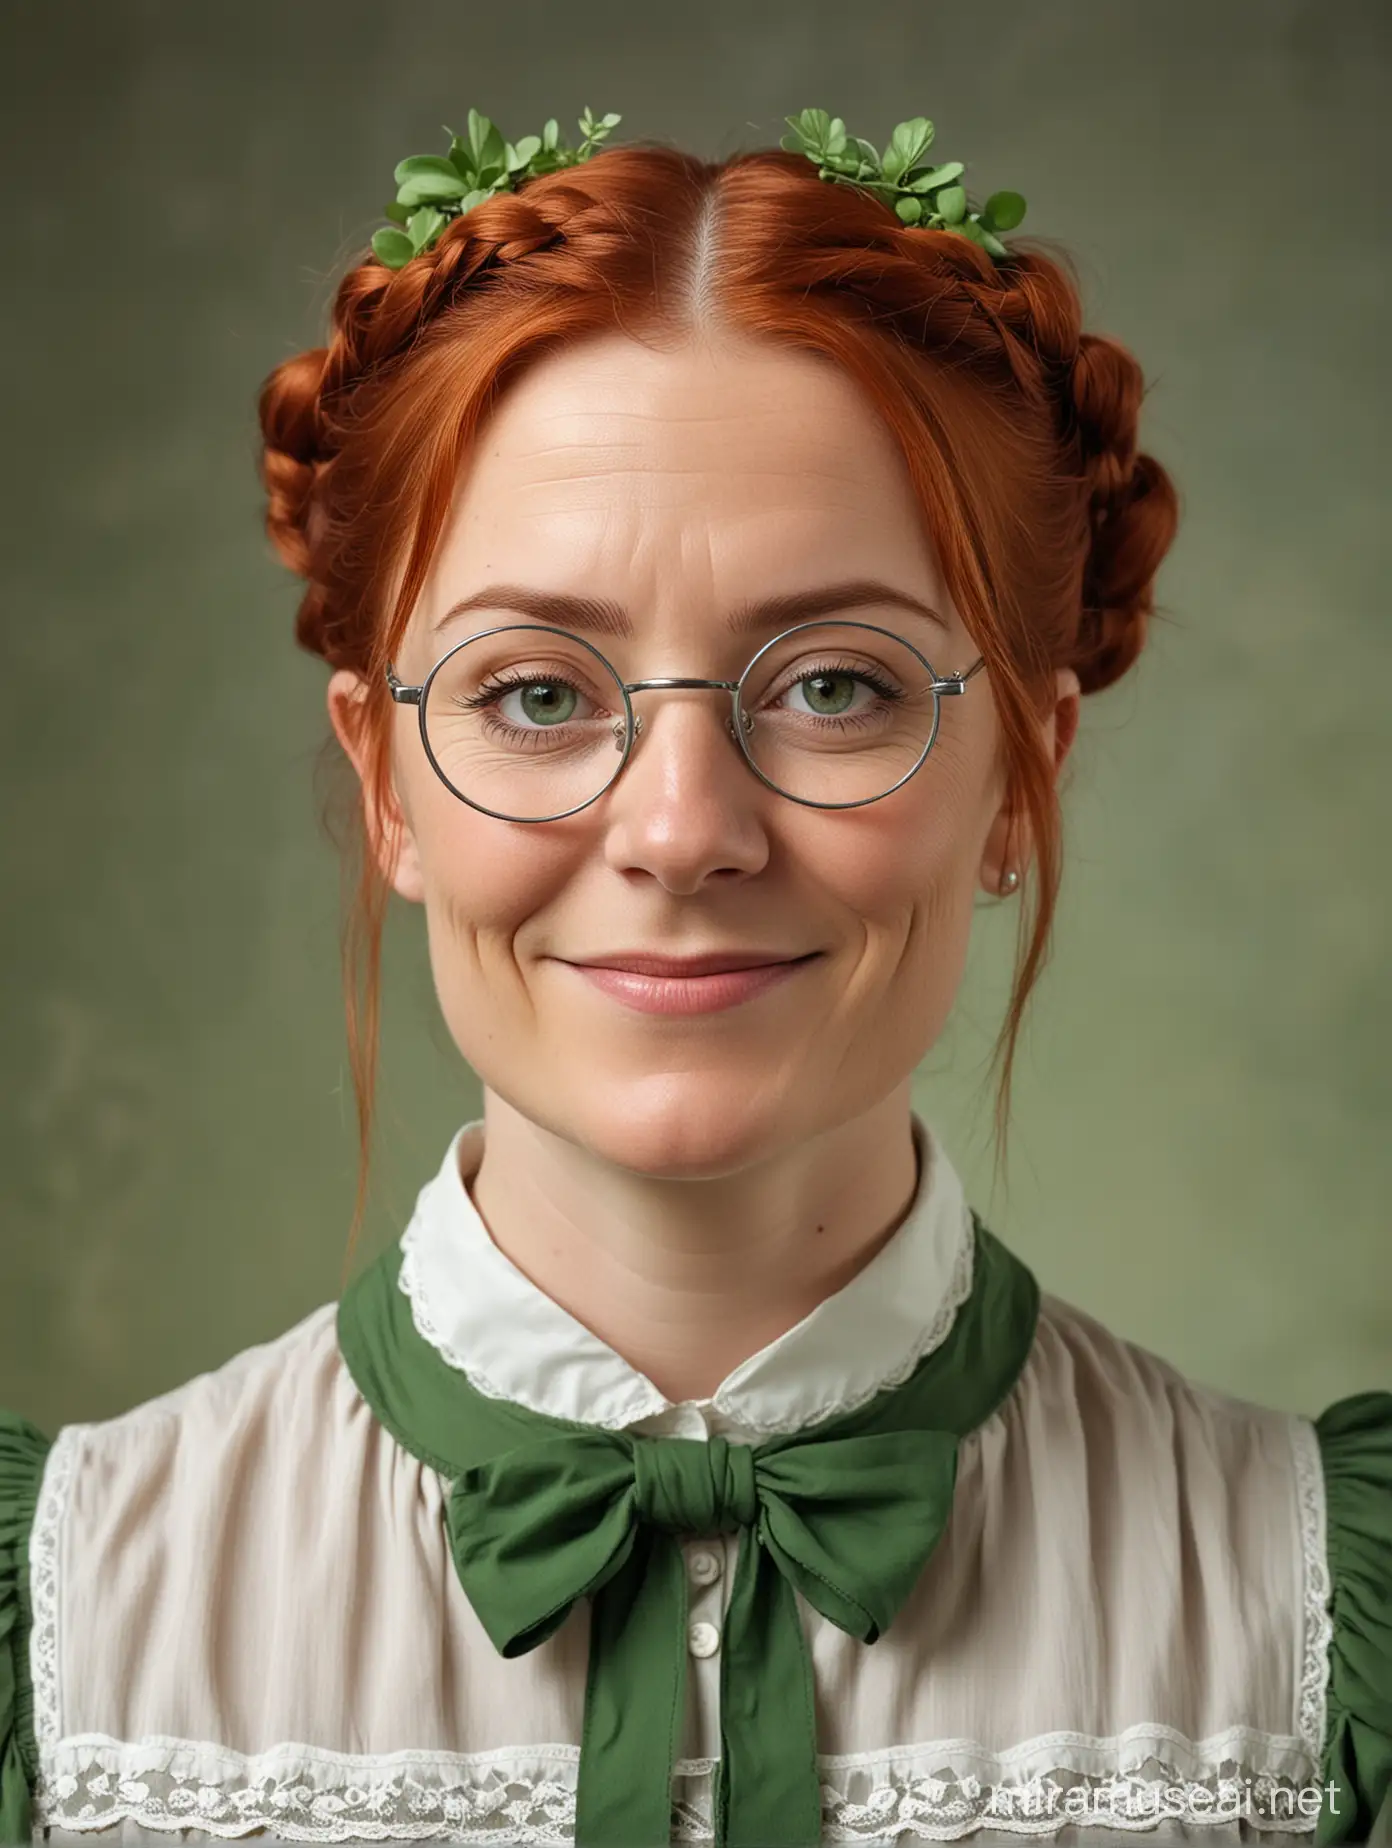 The setting is 1890s. An Irish woman in her late 40s with a short face and is smirking. She has red hair in a braid and wears silver circular spectacles. She is dressed in green and white. She is a botanist.